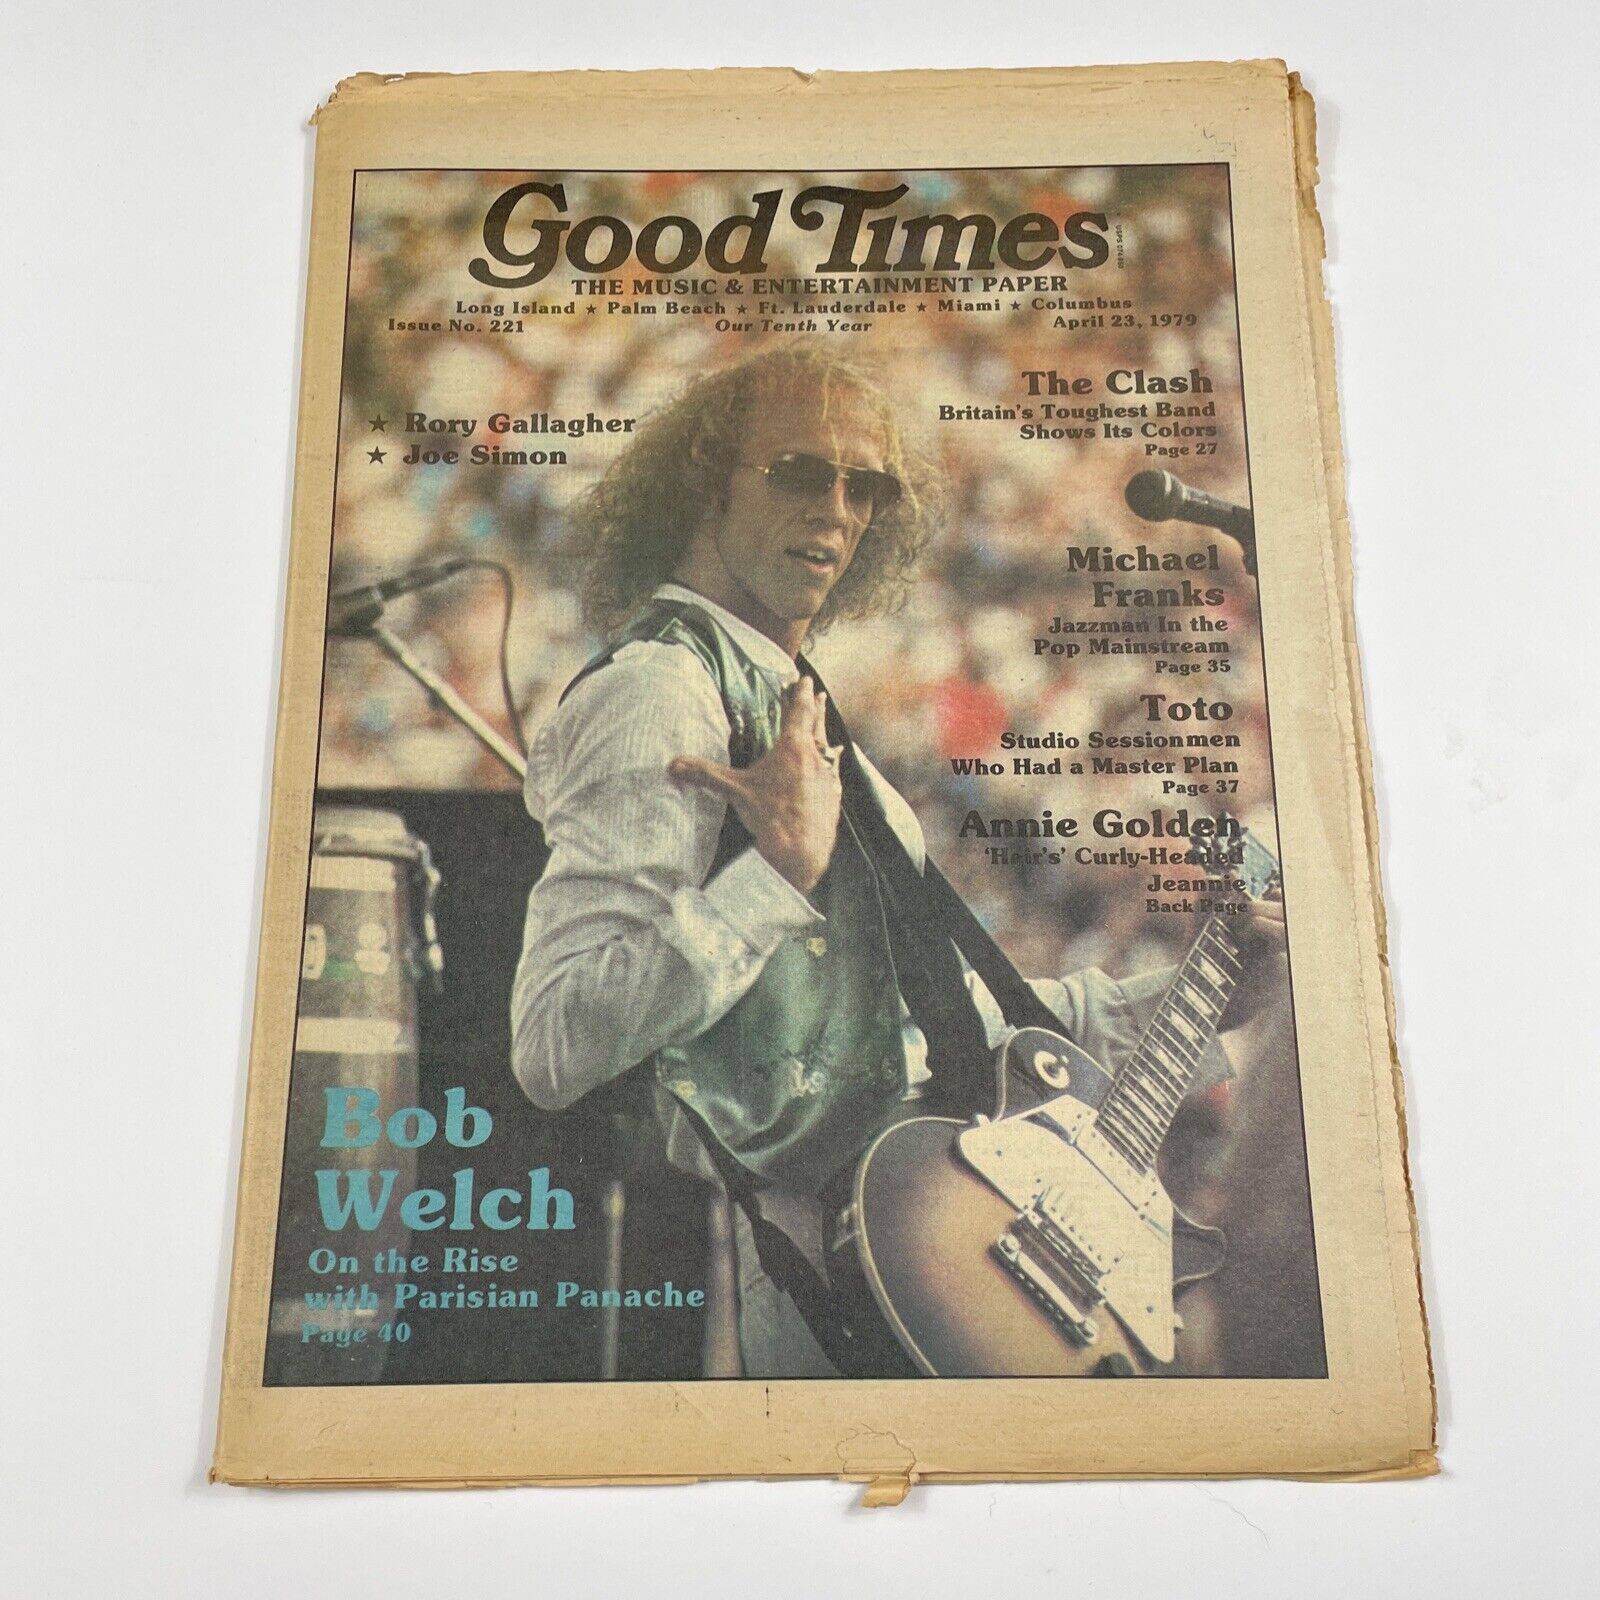 Good Times Newspaper Bob Welch On the Rise April 23, 1979